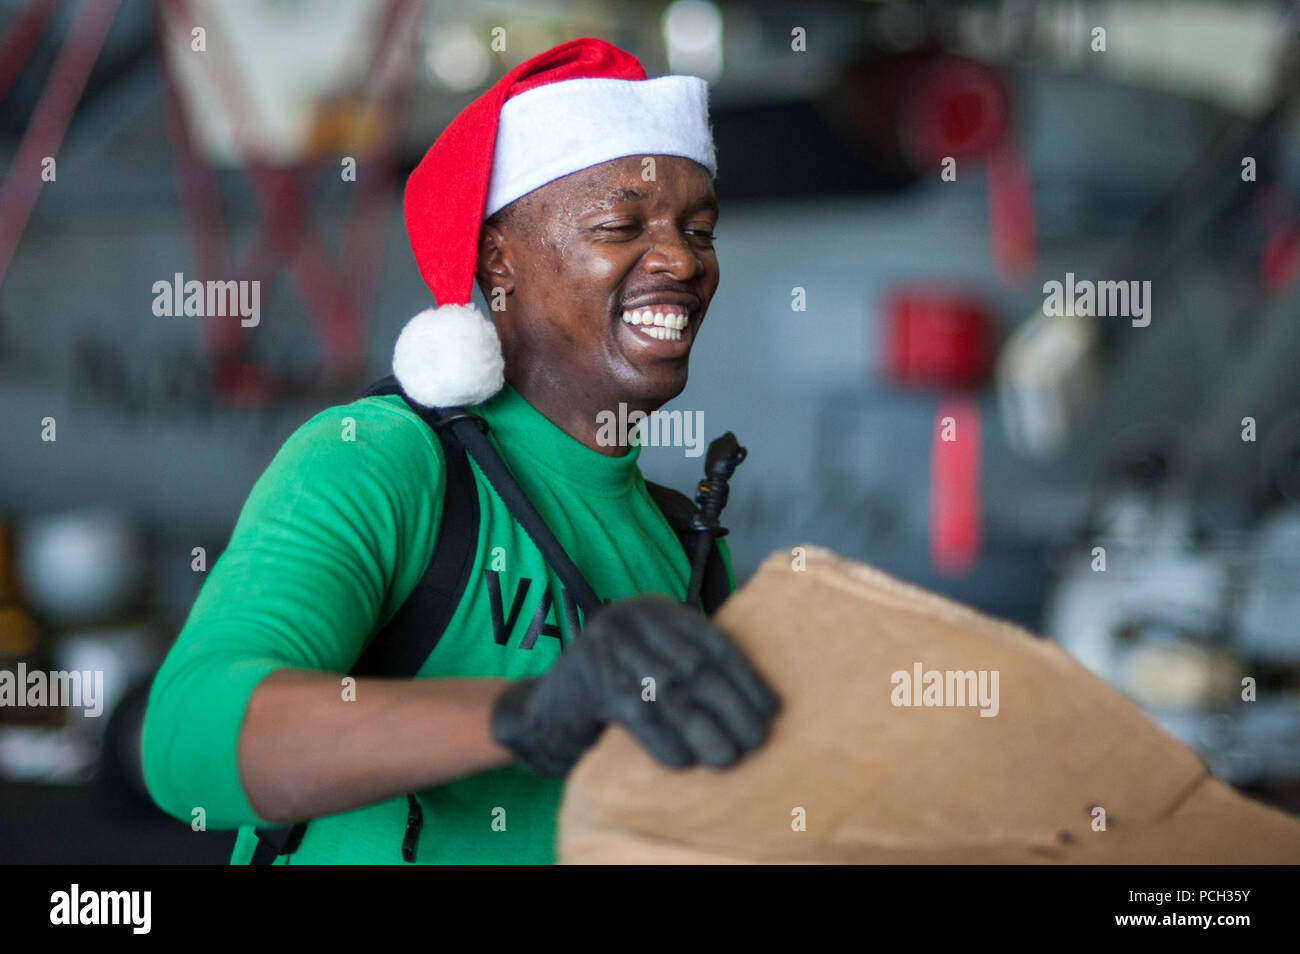 ARABIAN GULF (Dec. 20, 2013) Logistics Specialist 3rd Class Antony Muiruri, from Las Vegas, assigned to the Seahawks of Airborne Early Warning Squadron (VAW) 126, handles packages in the hangar bay of the aircraft carrier USS Harry S. Truman (CVN 75) during a replenishment-at-sea. Harry S. Truman, flagship for the Harry S. Truman Carrier Strike Group, is deployed to the U.S. 5th Fleet area of responsibility conducting maritime security operations, supporting theater security cooperation efforts and supporting Operation Enduring Freedom. Stock Photo